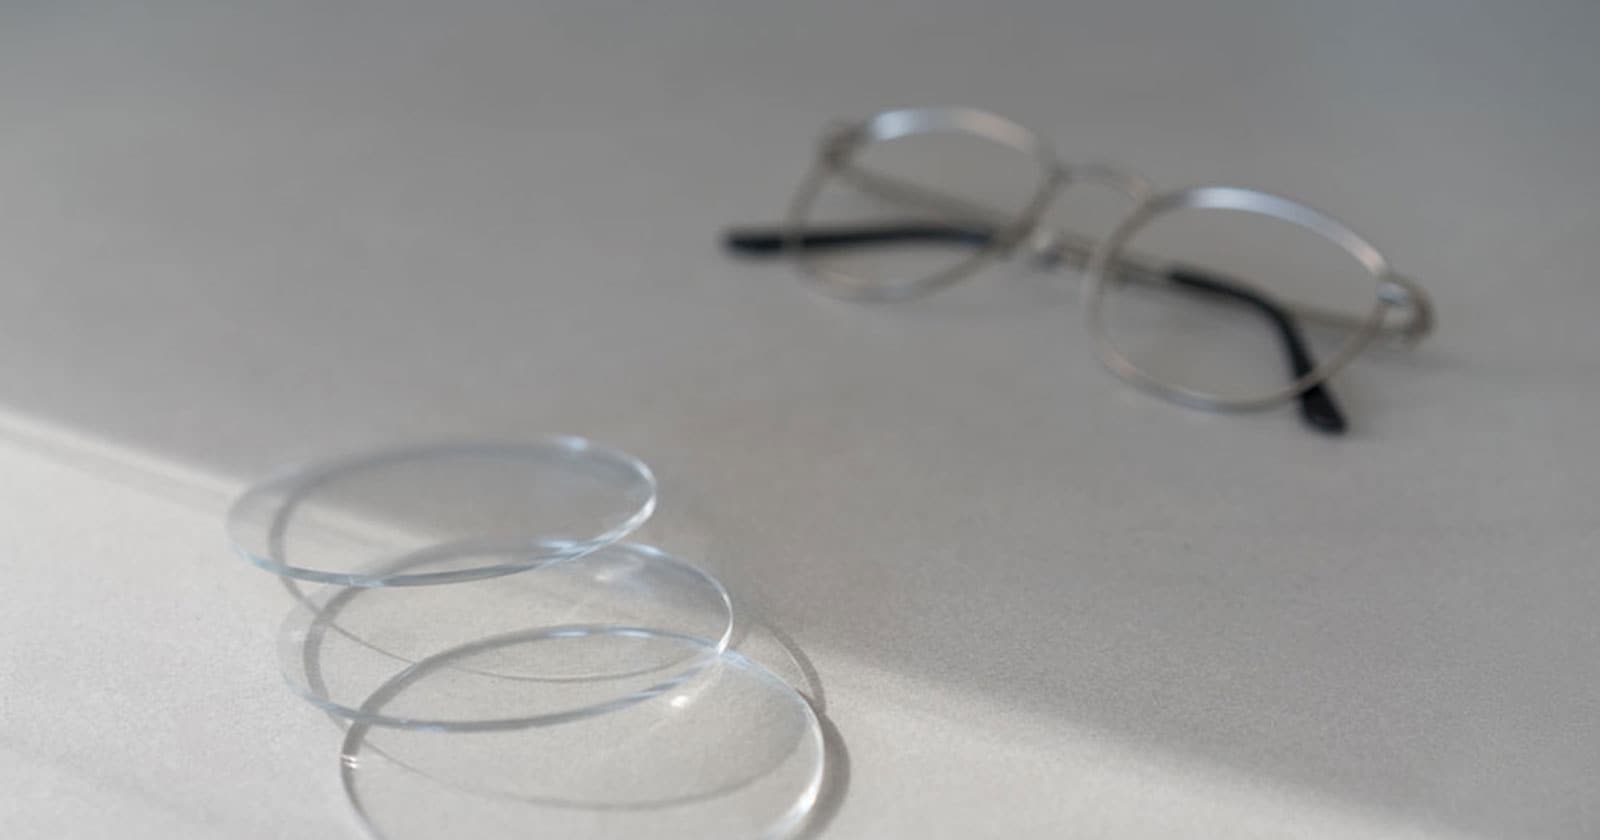 What are Prism Glasses? Do You Need Prism Eyeglasses?